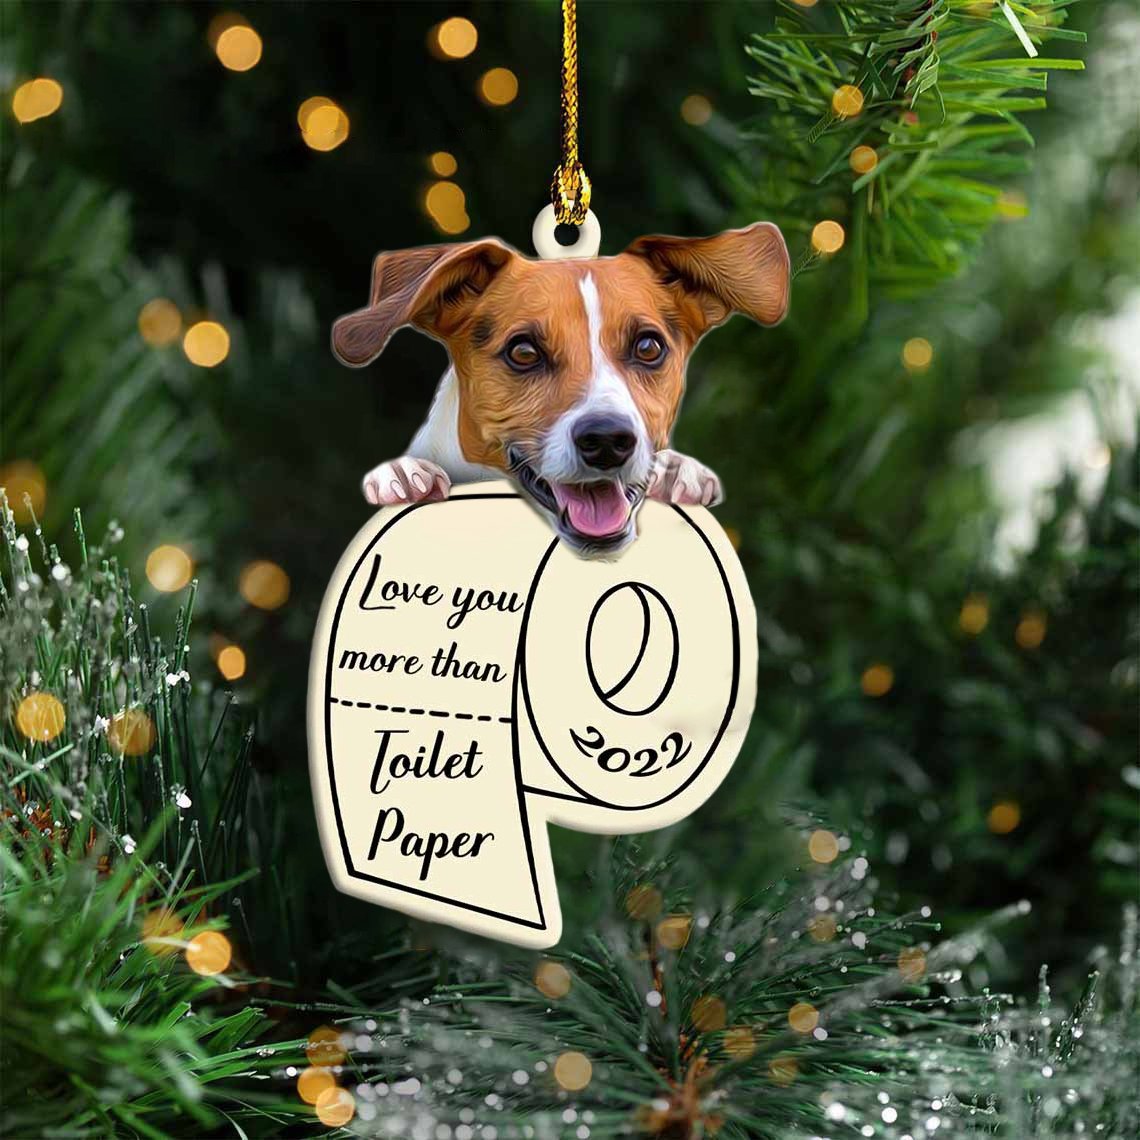 Jack Russell Terrier Love You More Than Toilet Paper 2022 Hanging Ornament